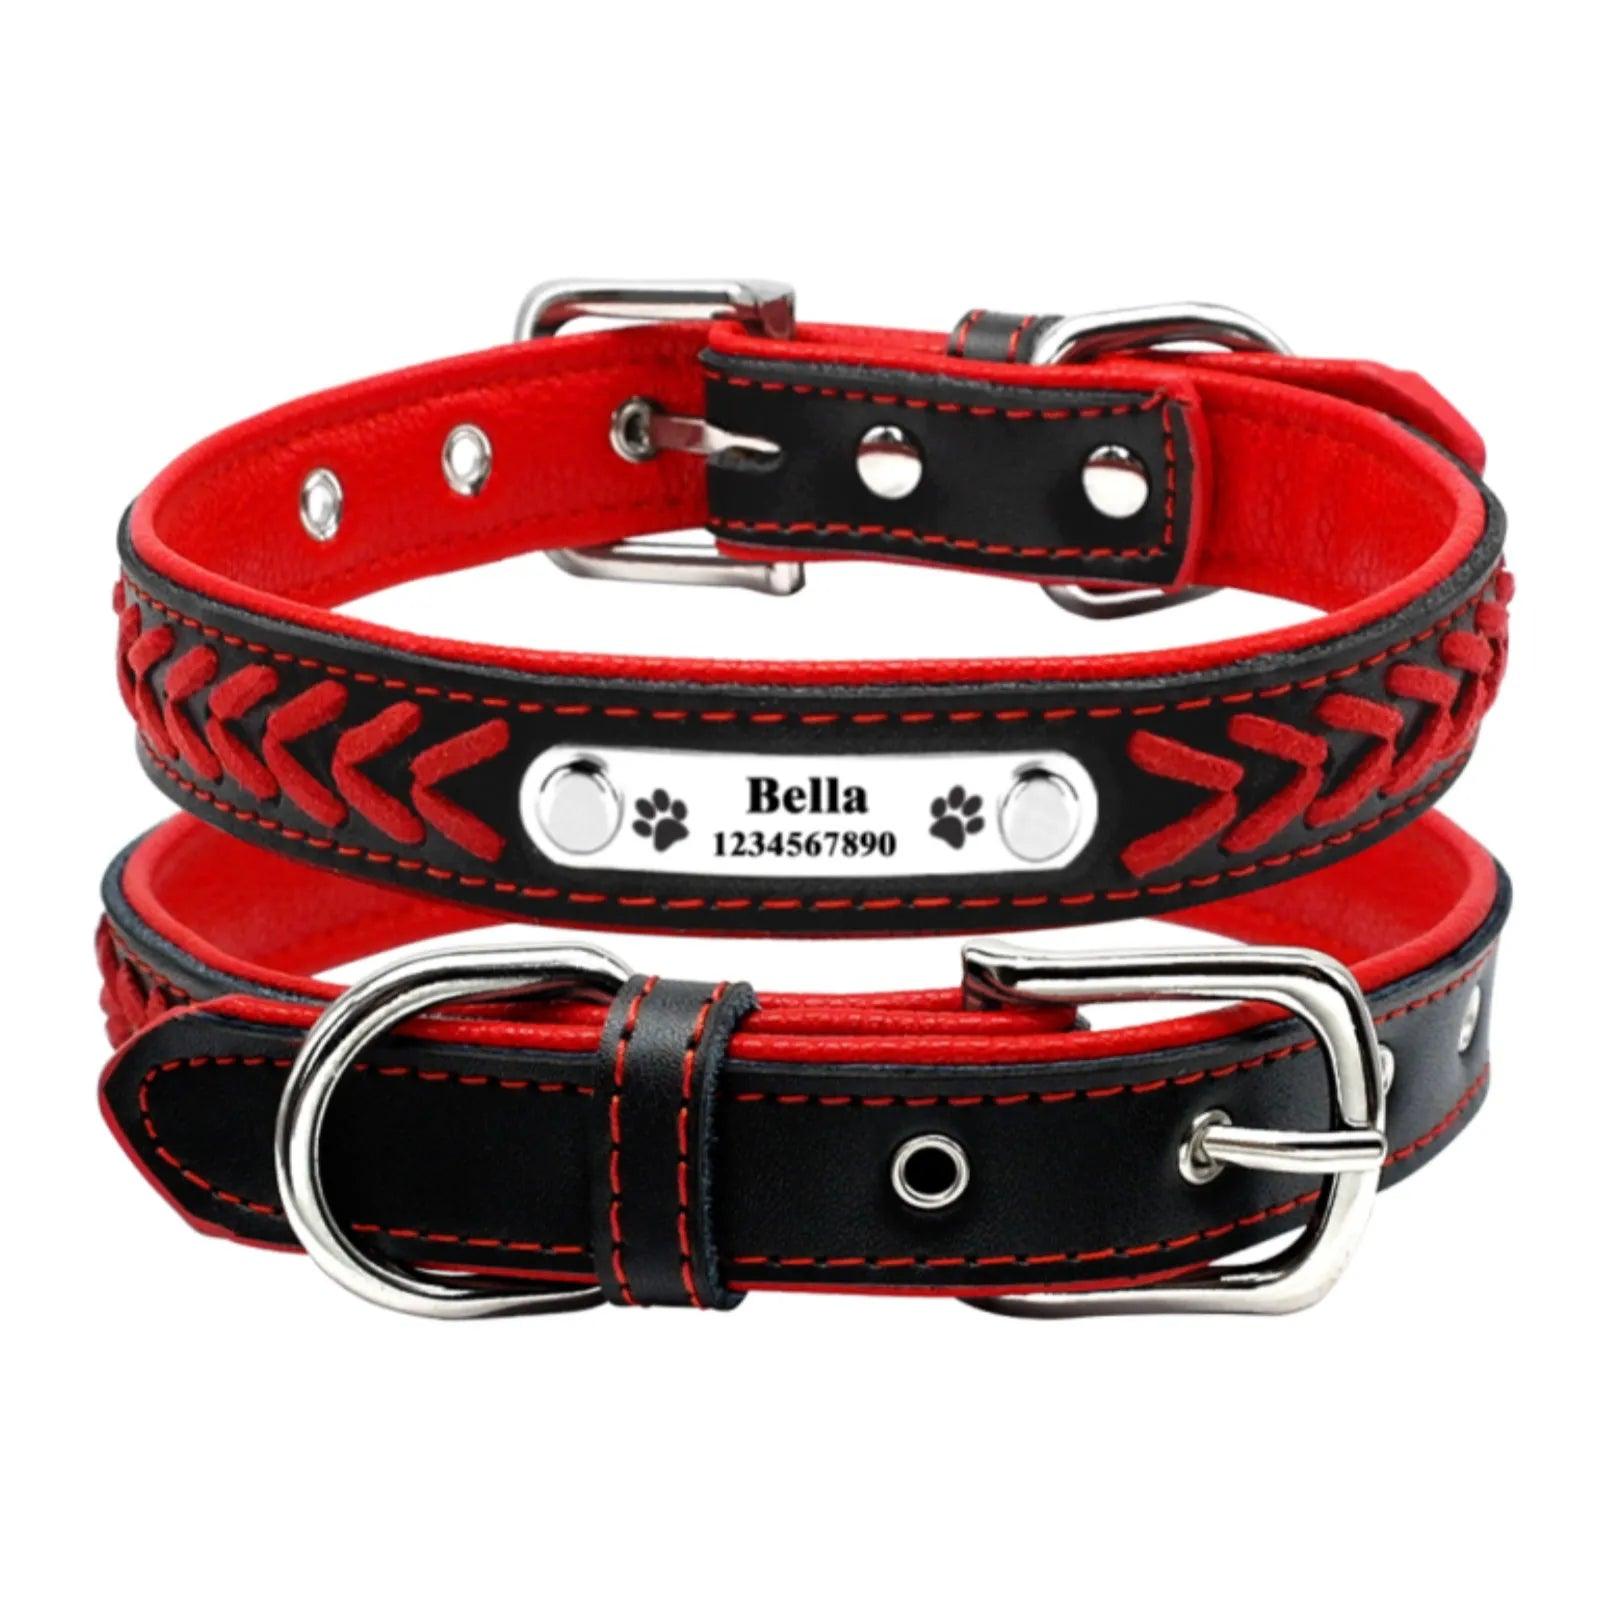 Personalized Leather Dog Collar with Custom Engraving - Adjustable for Small to Large Breeds  ourlum.com   